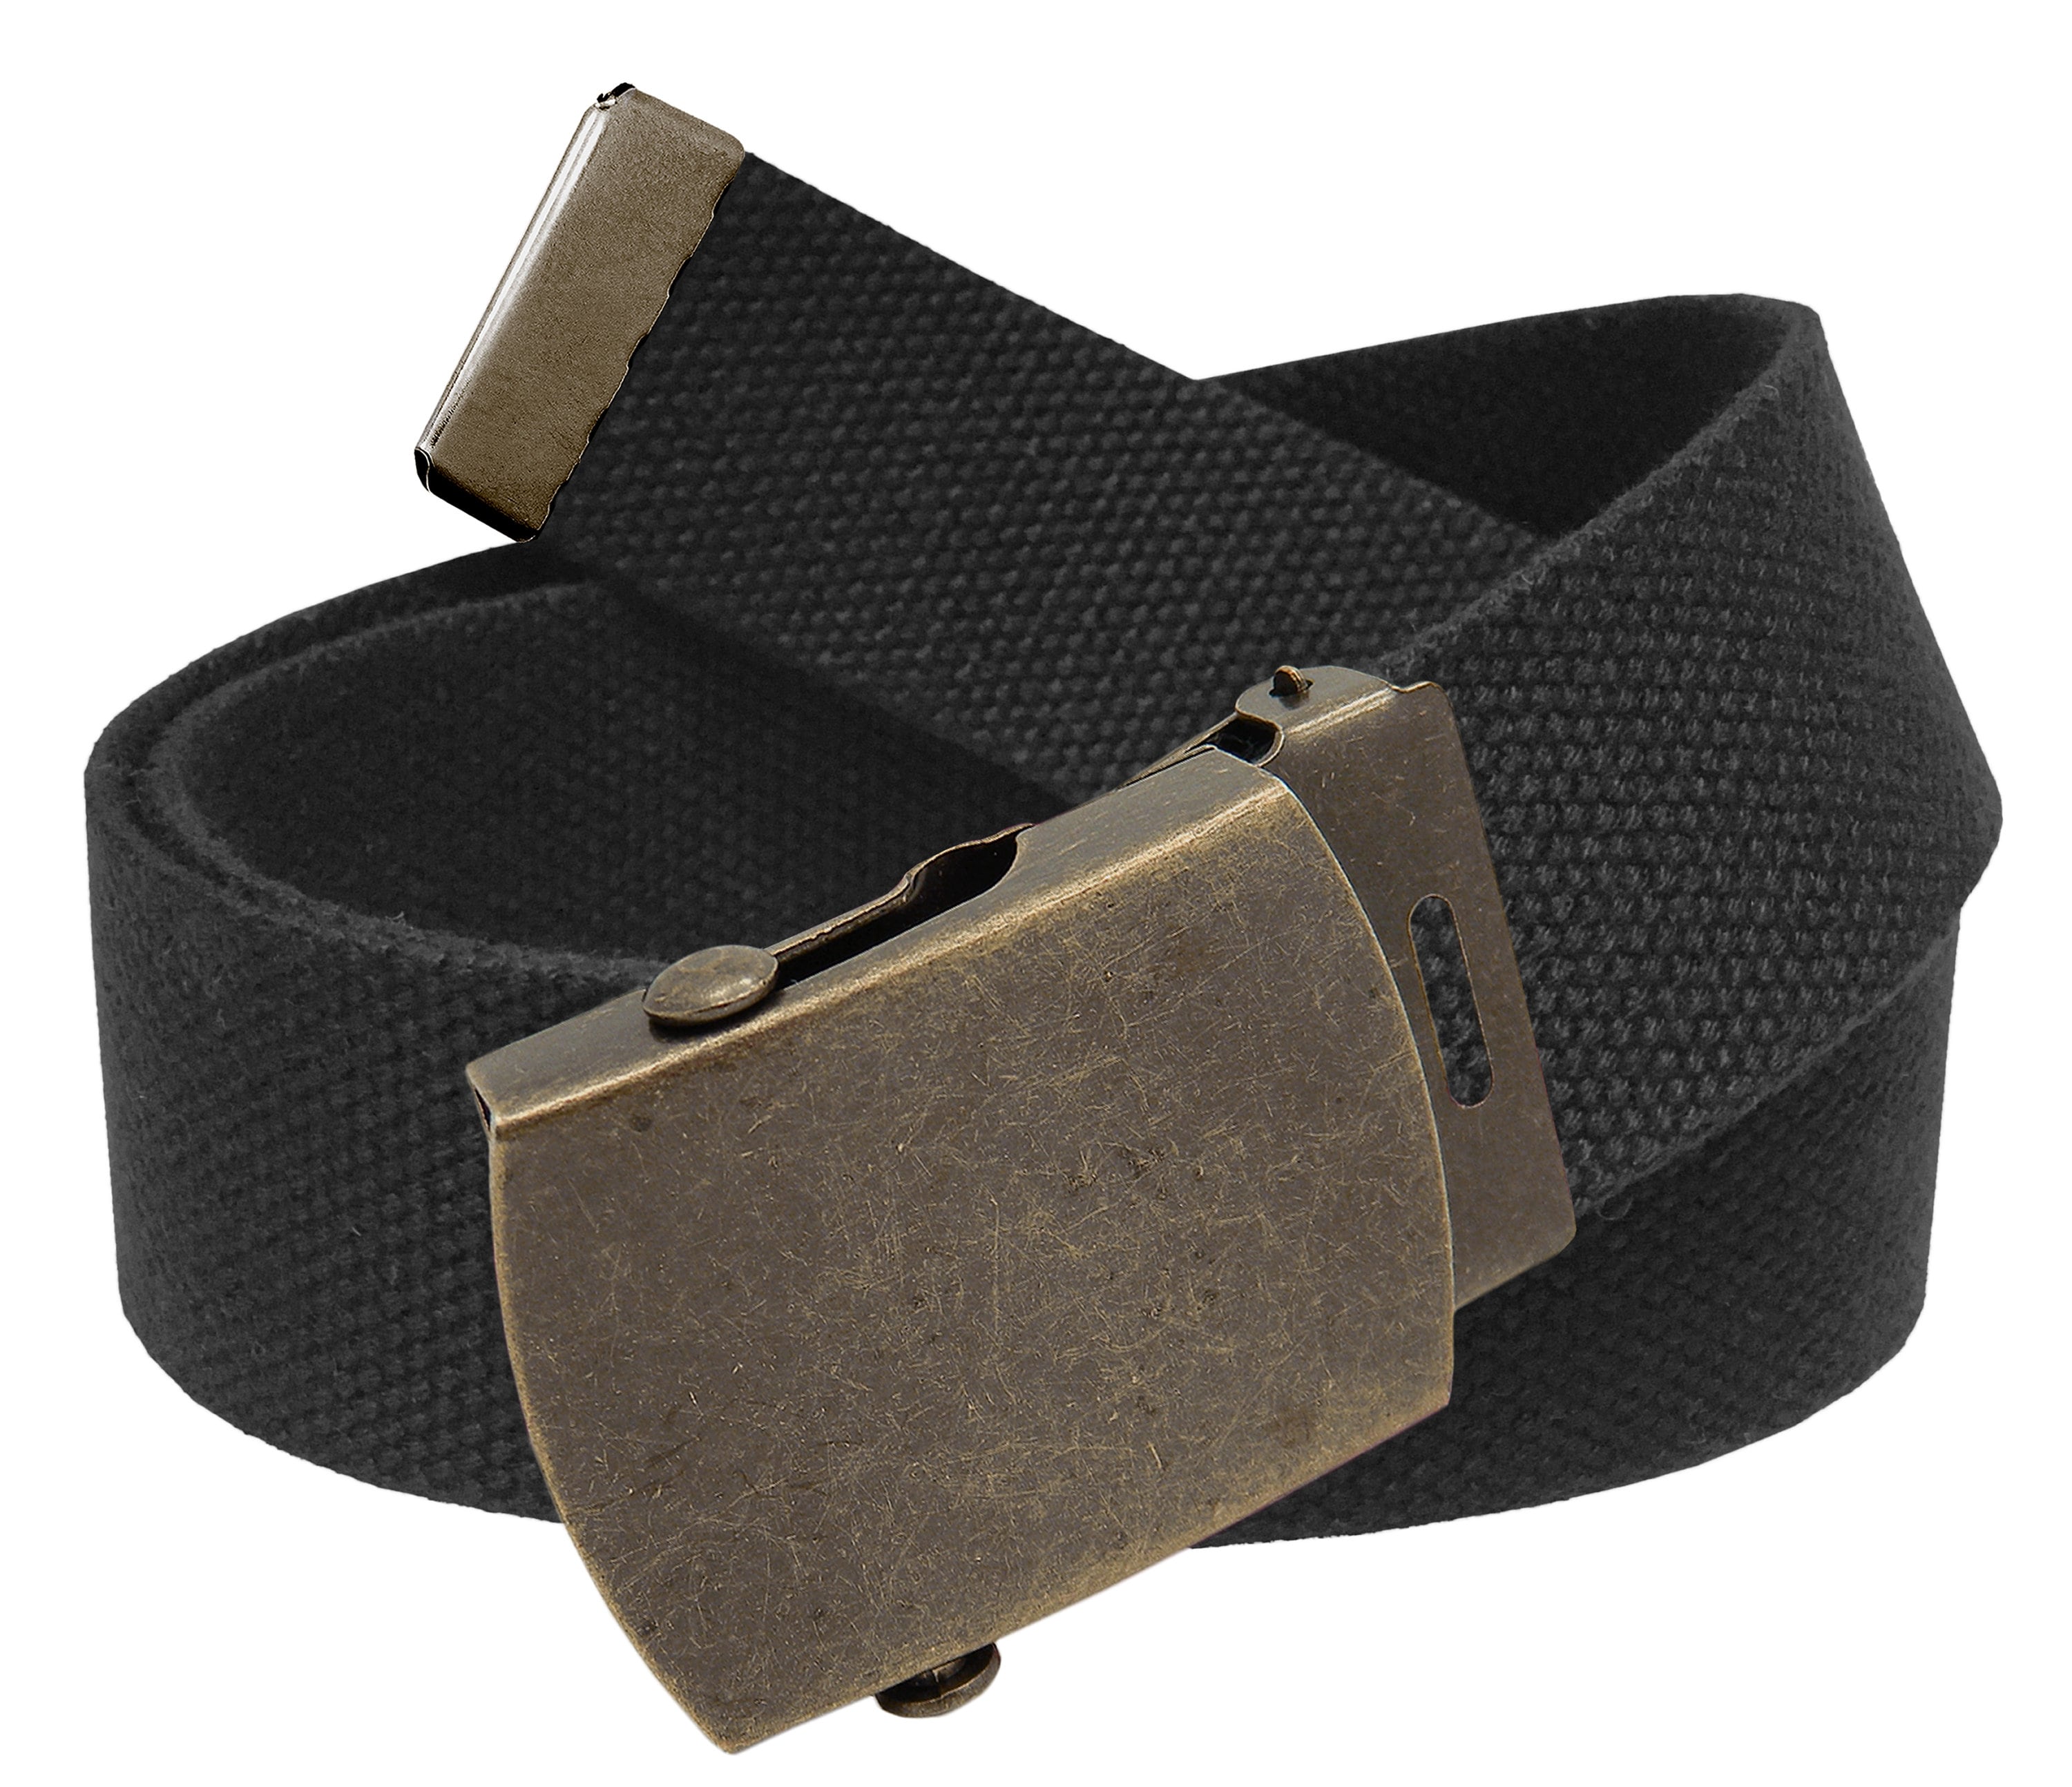 Men's Classic Silver Slider Military Belt Buckle with Canvas Web Belt Small  Black 